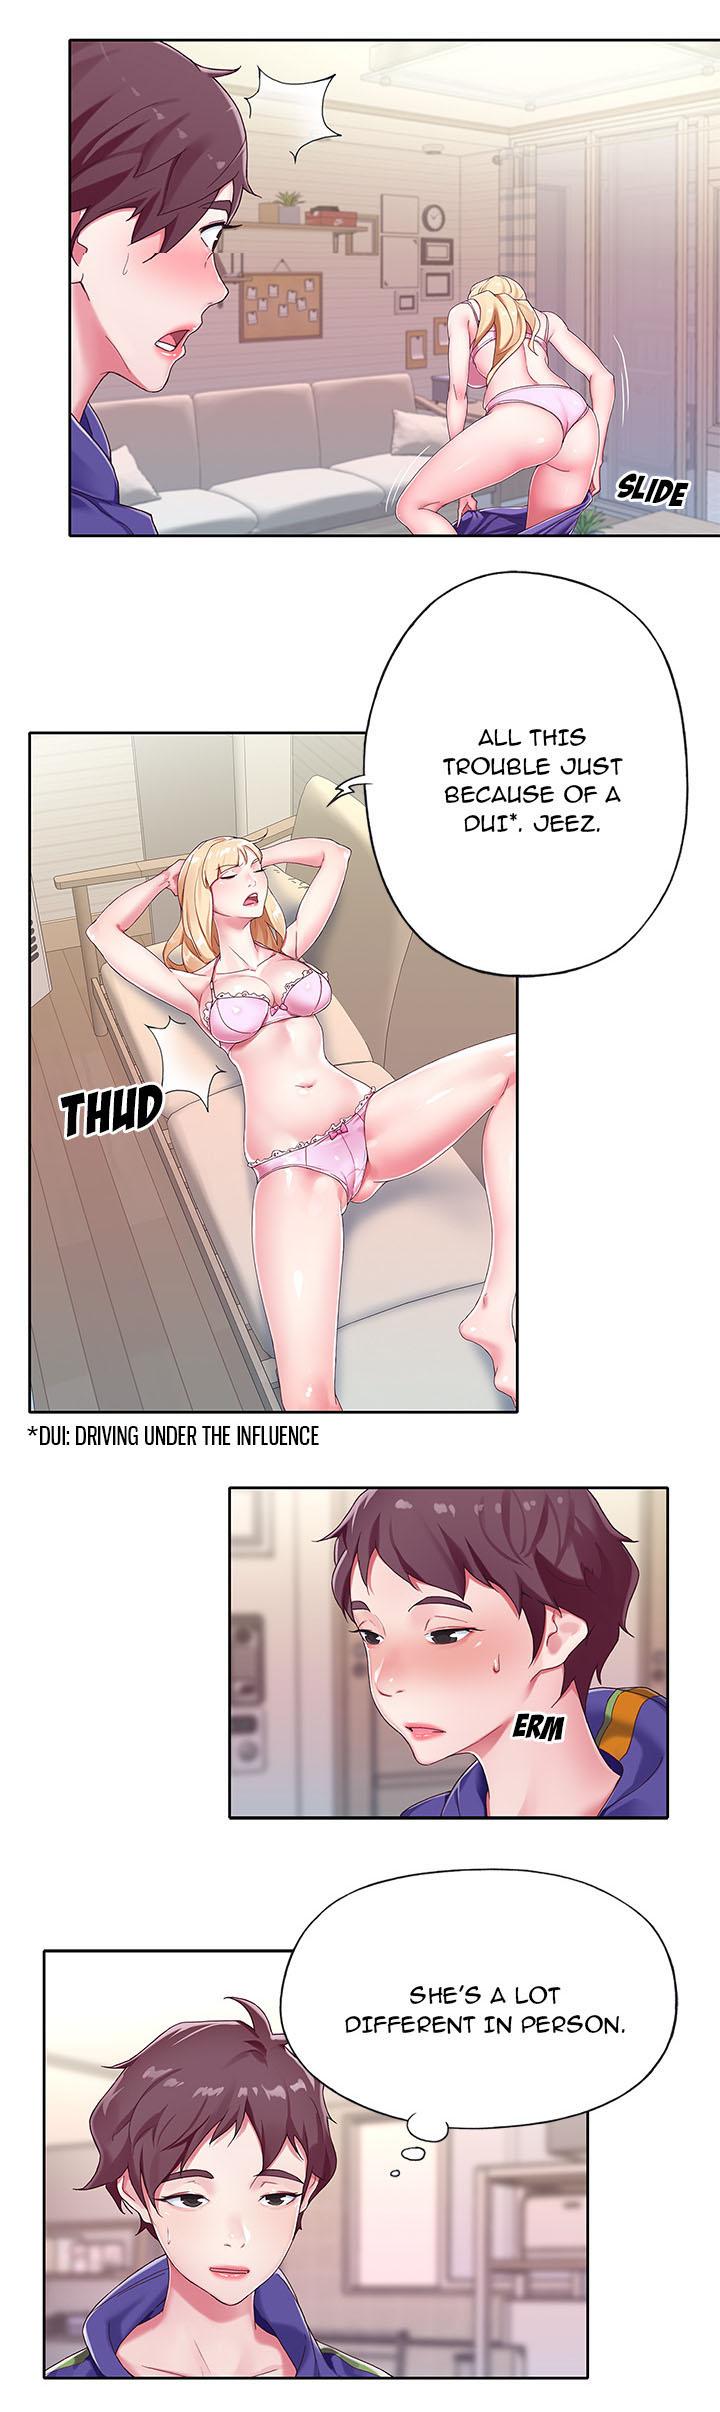 Head The Idol Project Ch.1/? Free Blowjob - Page 9